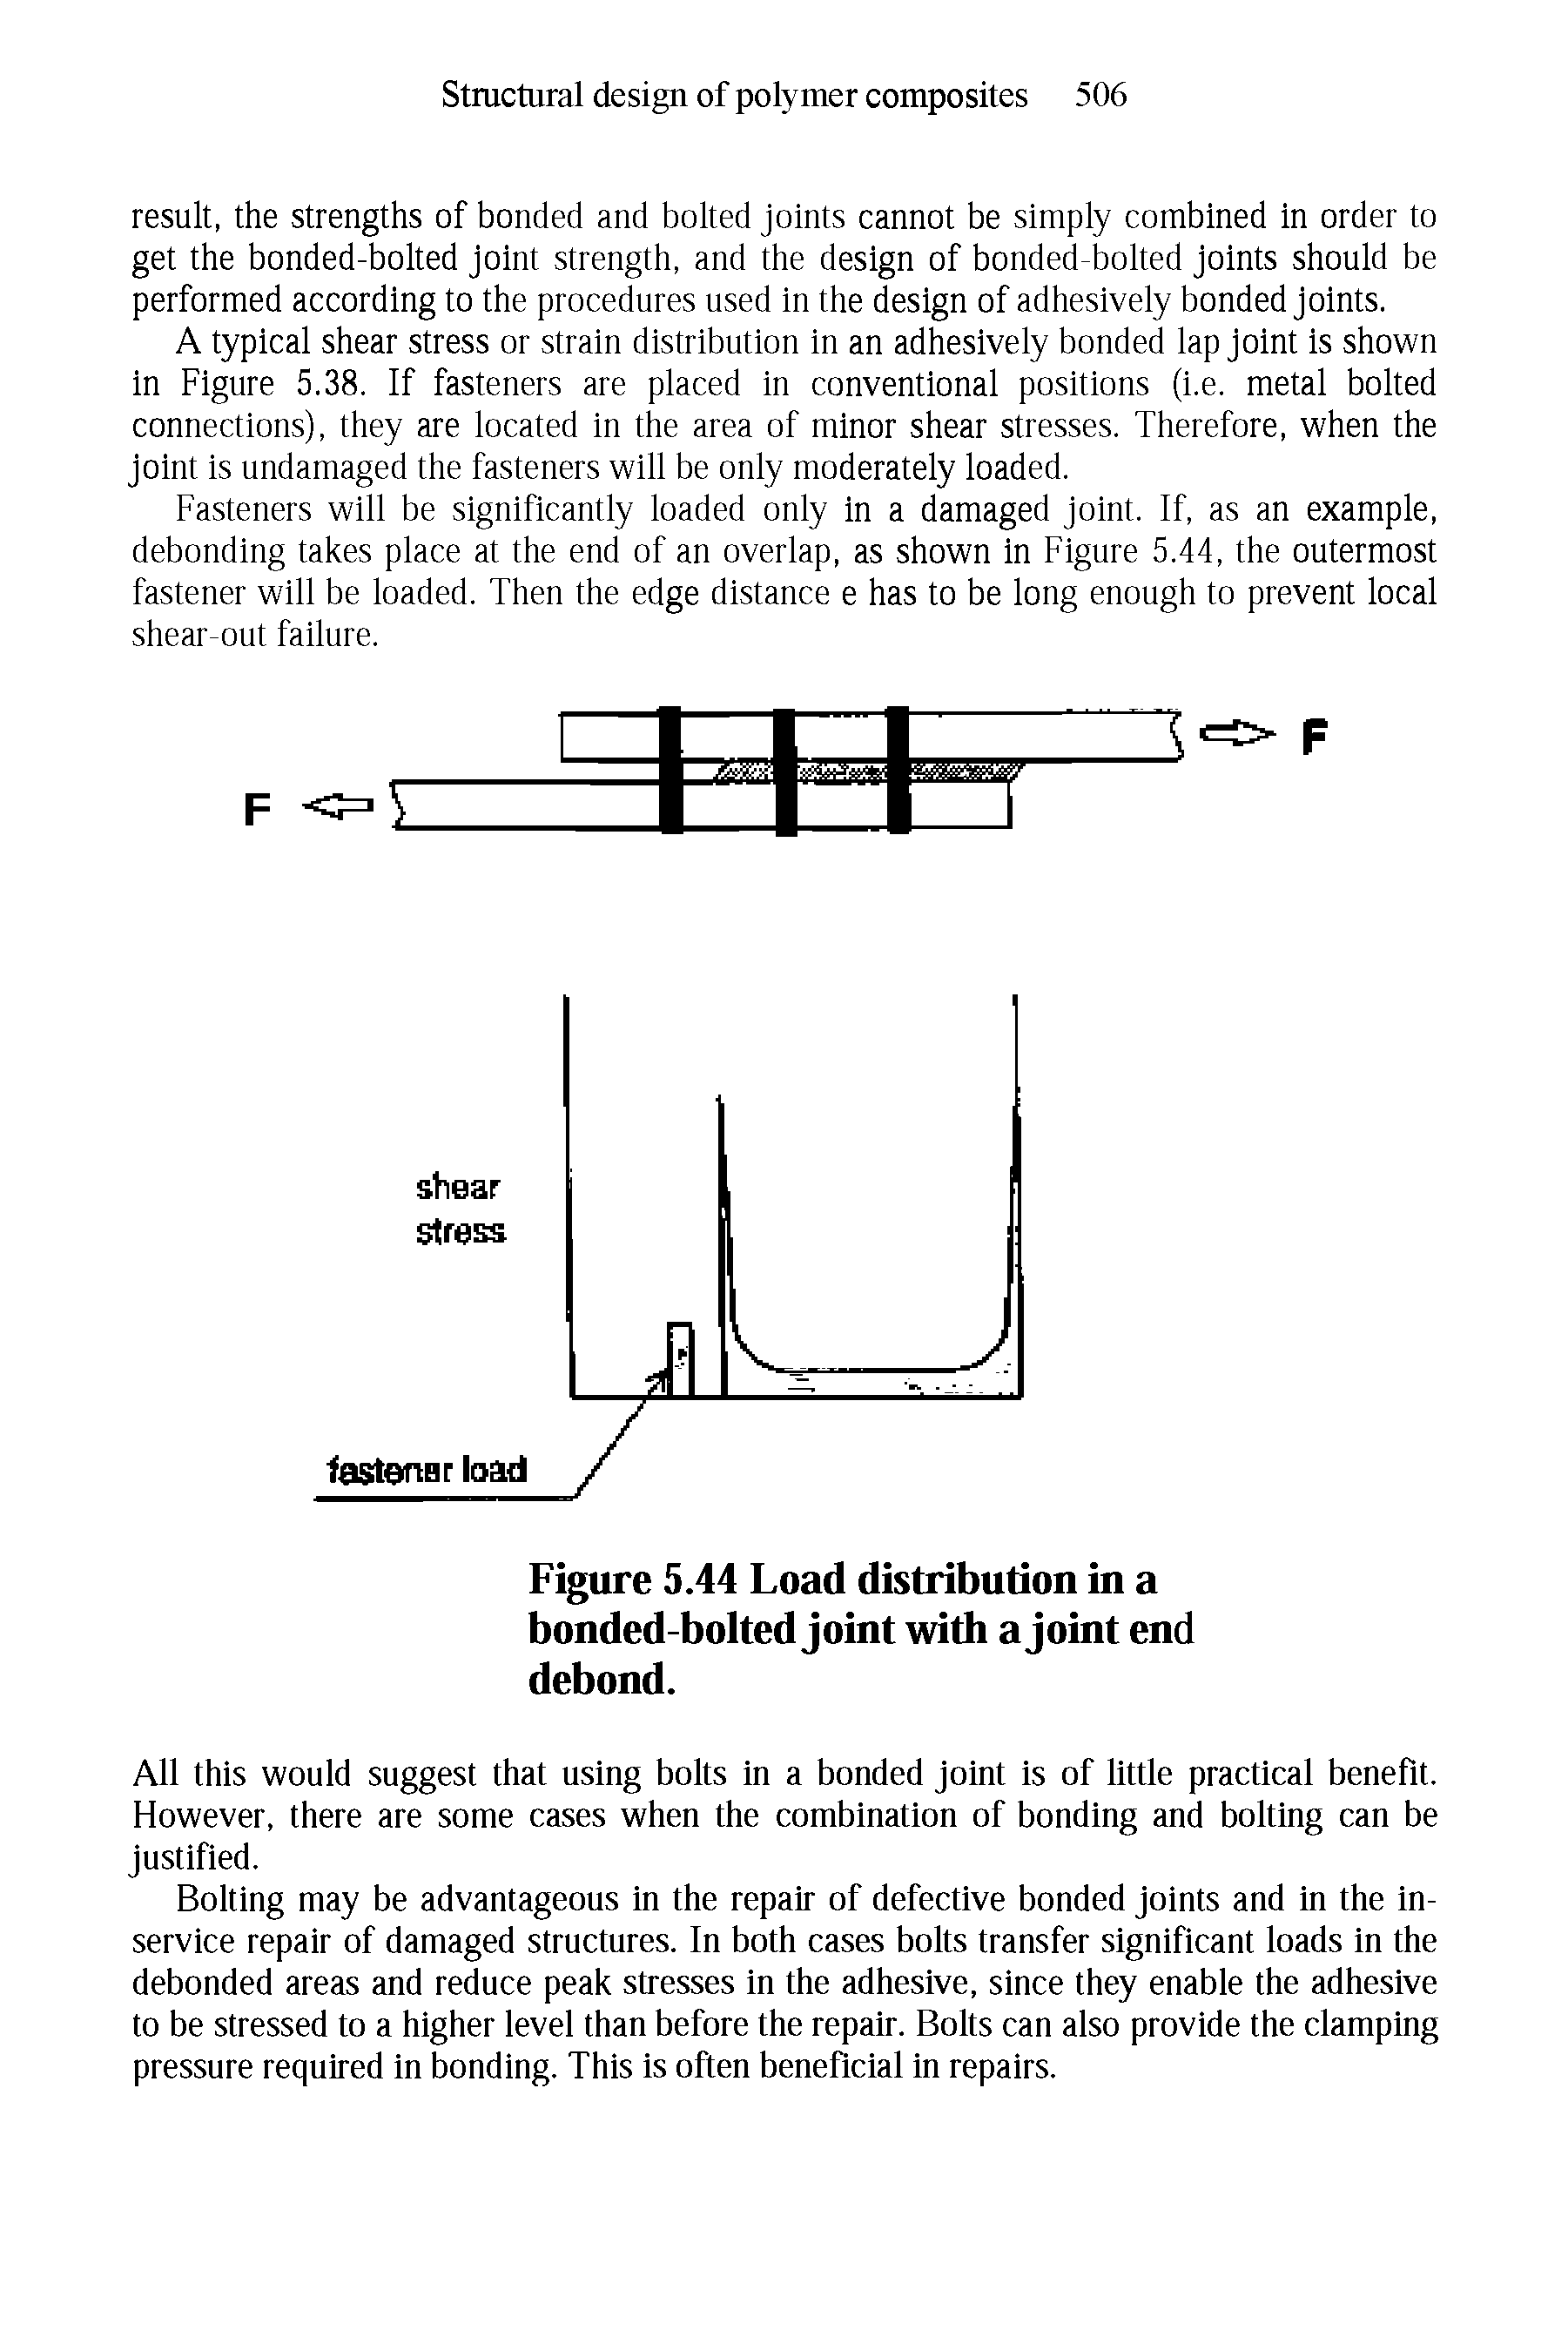 Figure 5.44 Load distribution in a bonded-bolted joint with a joint end debond.